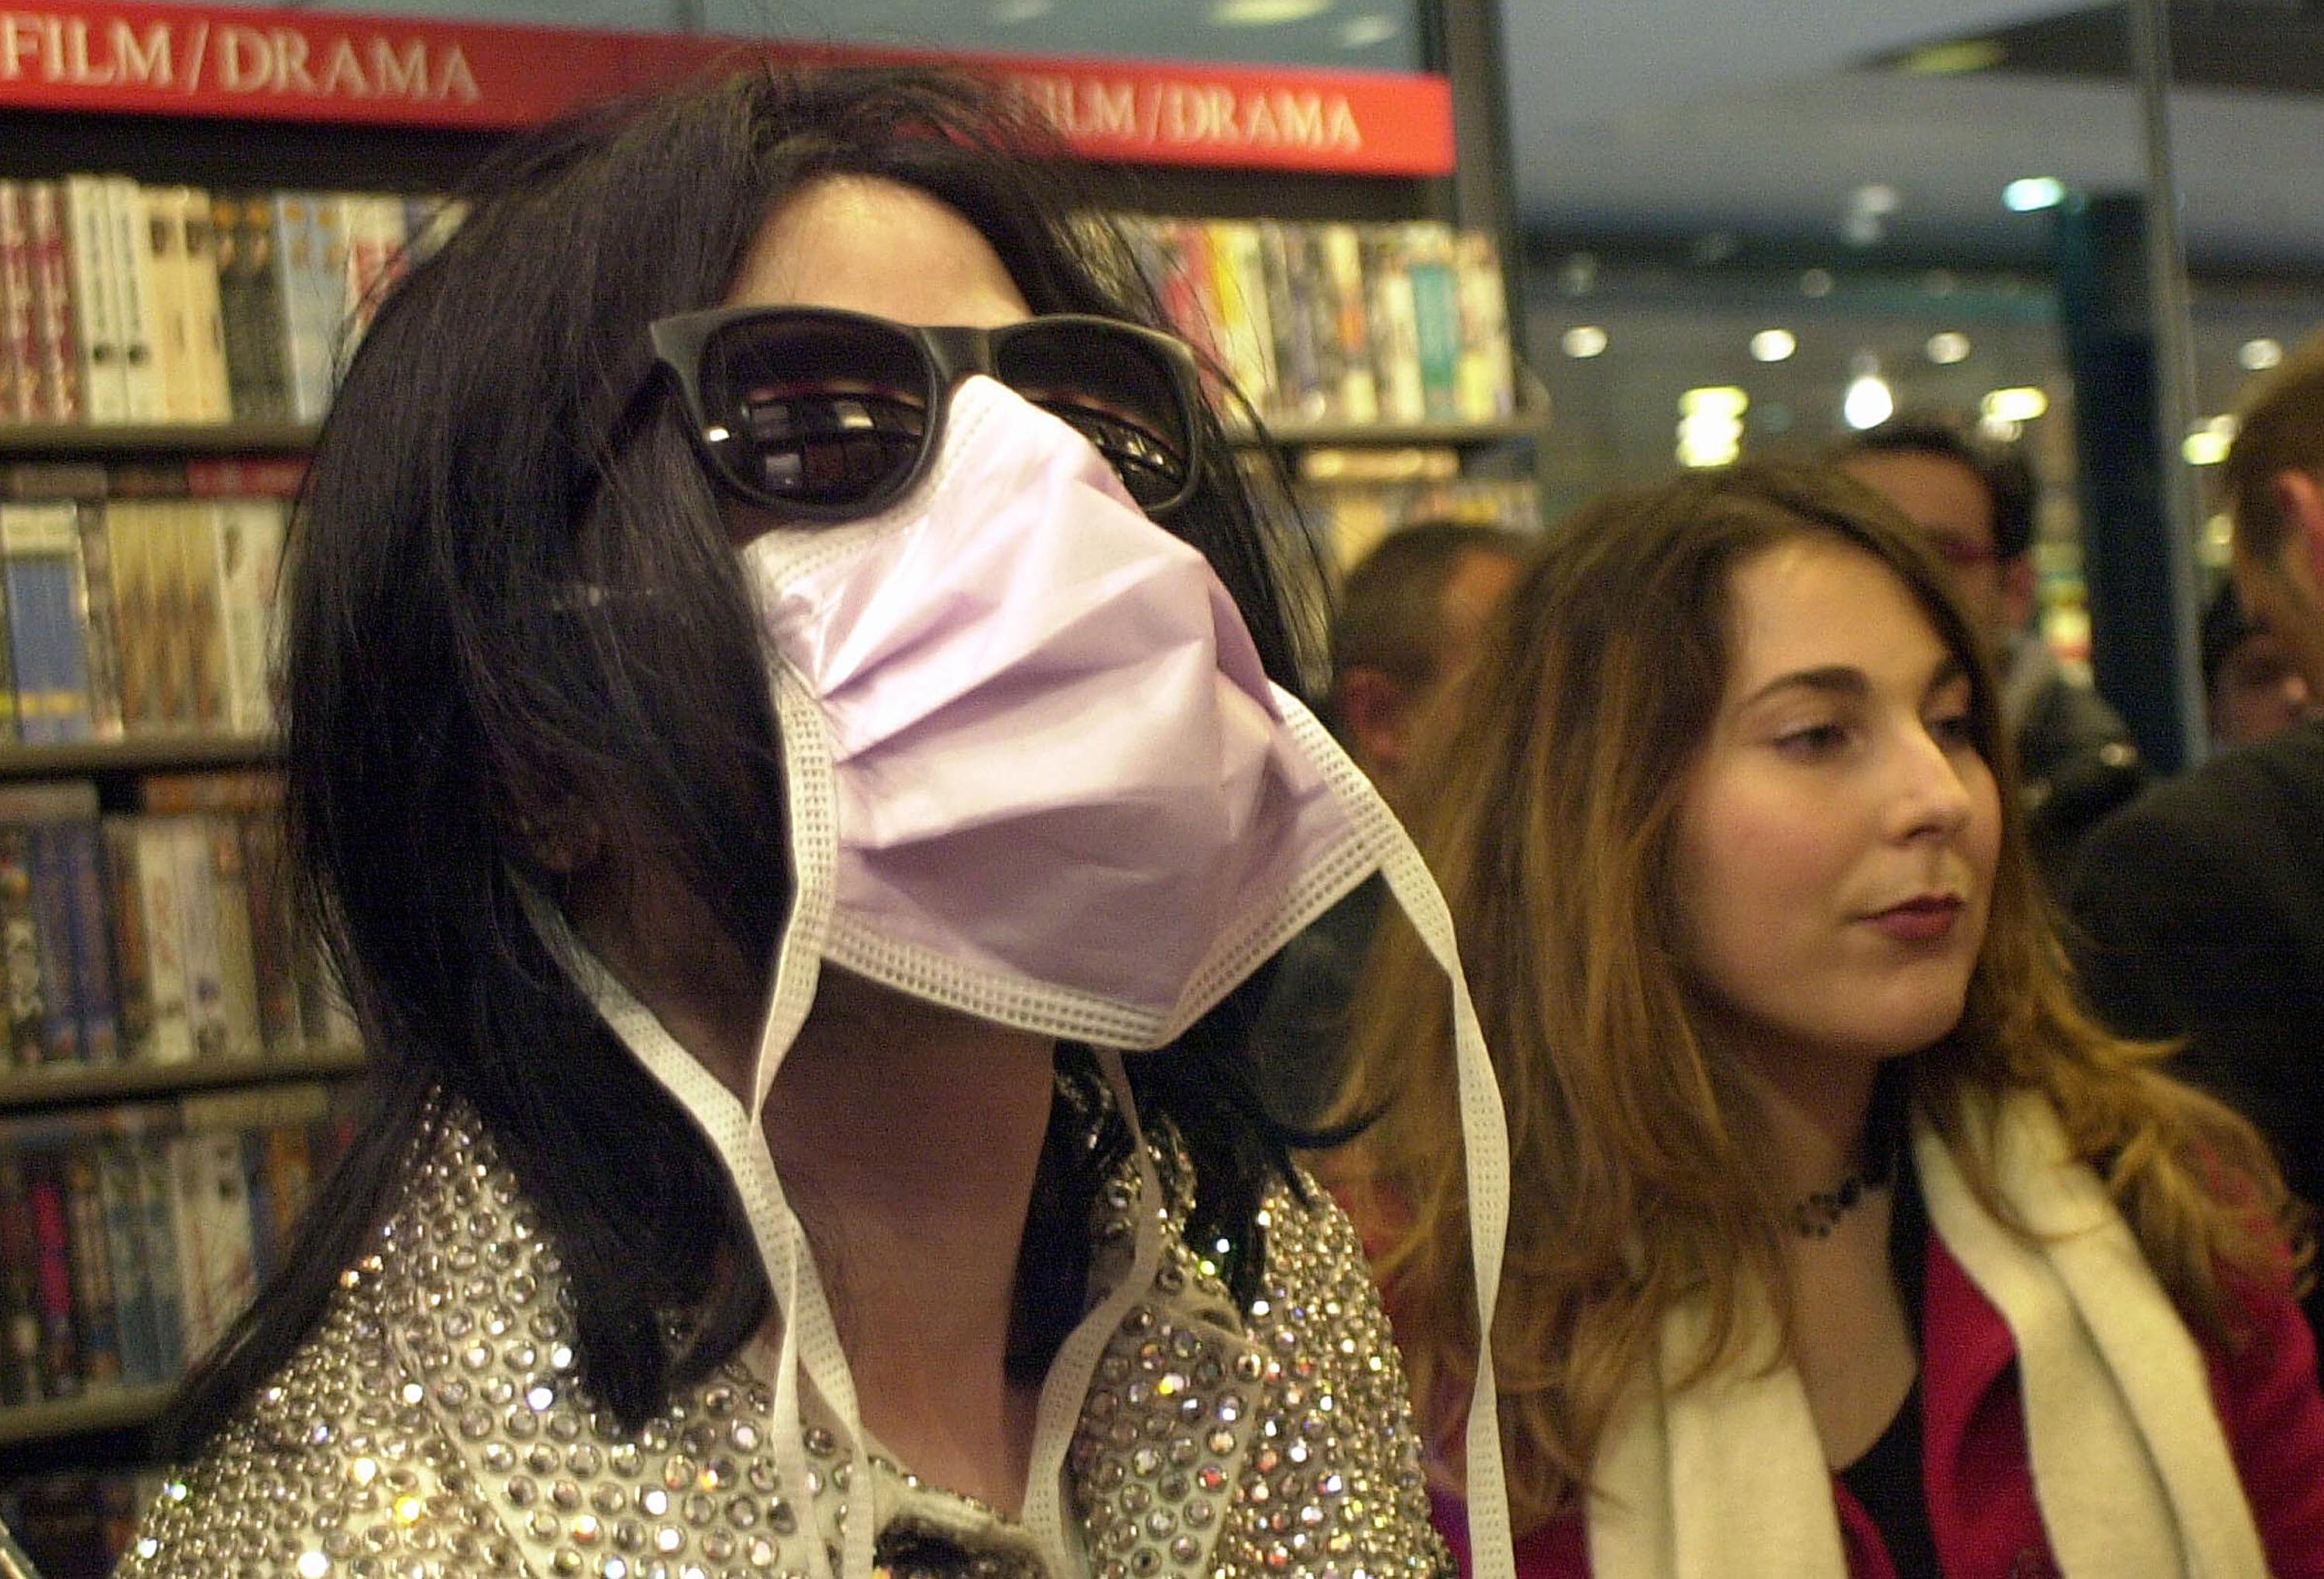 Michael Jackson ‘Predicted Coronavirus & That’s Why He Wore a Facemask’ - Thumbnail Image